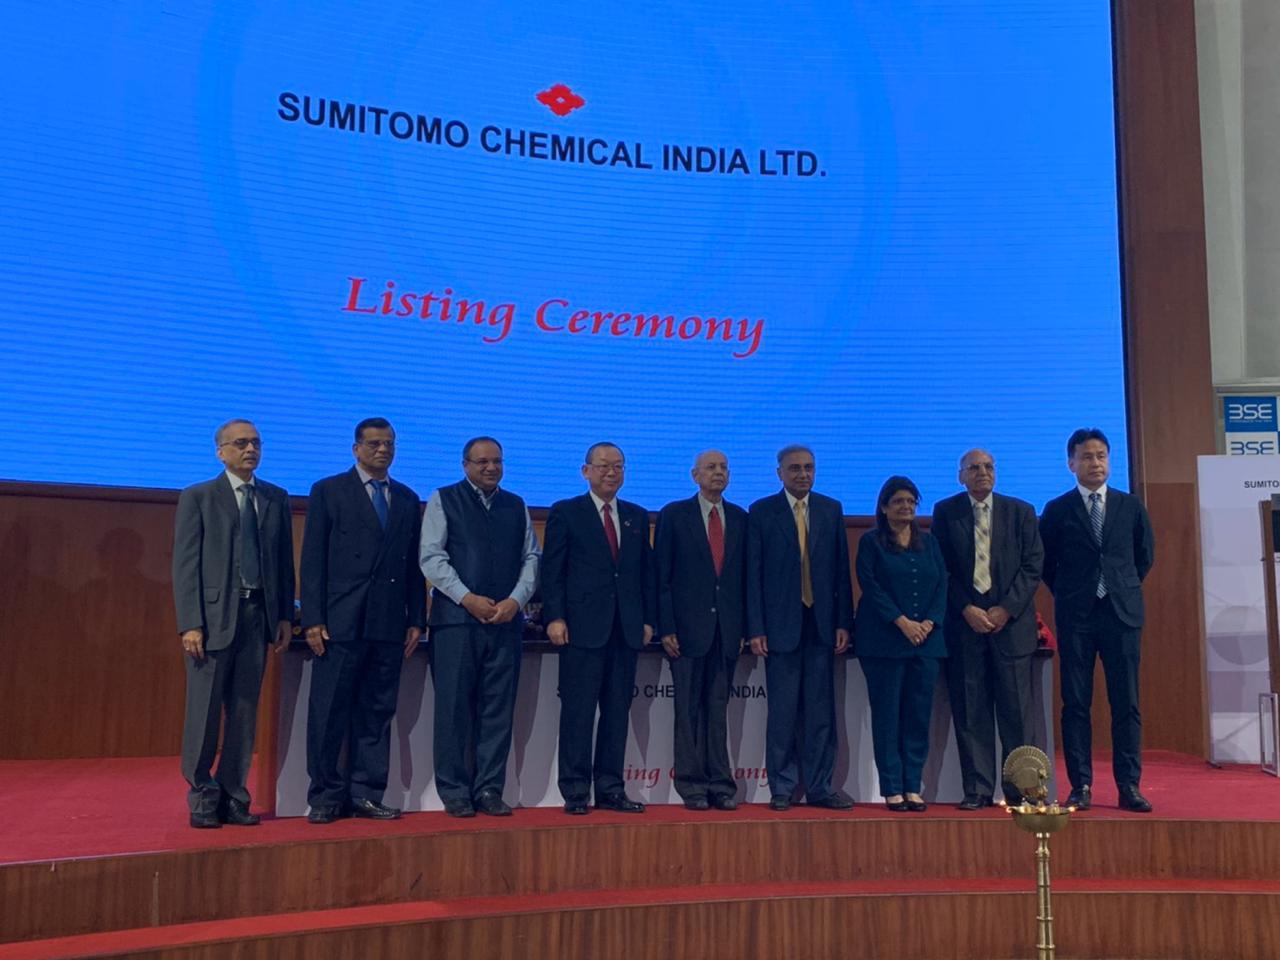 Mr. Ray Nishimoto, Representative Director & Executive Vice President, Mr. Mukul Asher, Chairman & Independent Director, Sumitomo Chemical India Ltd, Mr. Nayan Mehta, CFO, BSE with other dignitaries were present for the gong ceremony at the listing of Sumitomo Chemical India Ltd held today at BSE